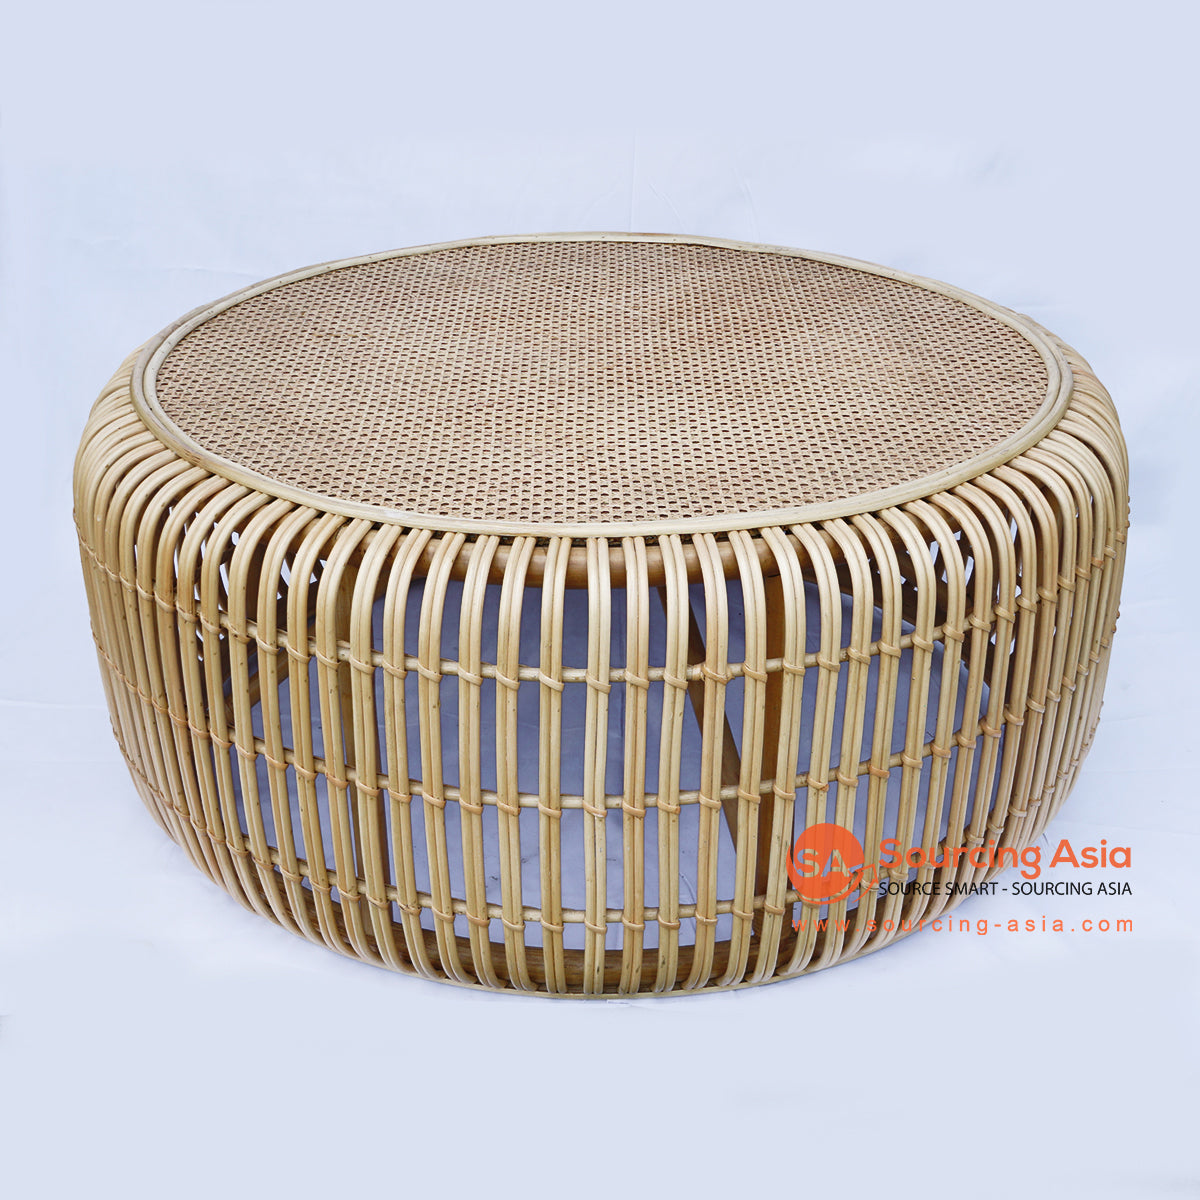 BNTC005 NATURAL RATTAN ROUND COFFEE TABLE